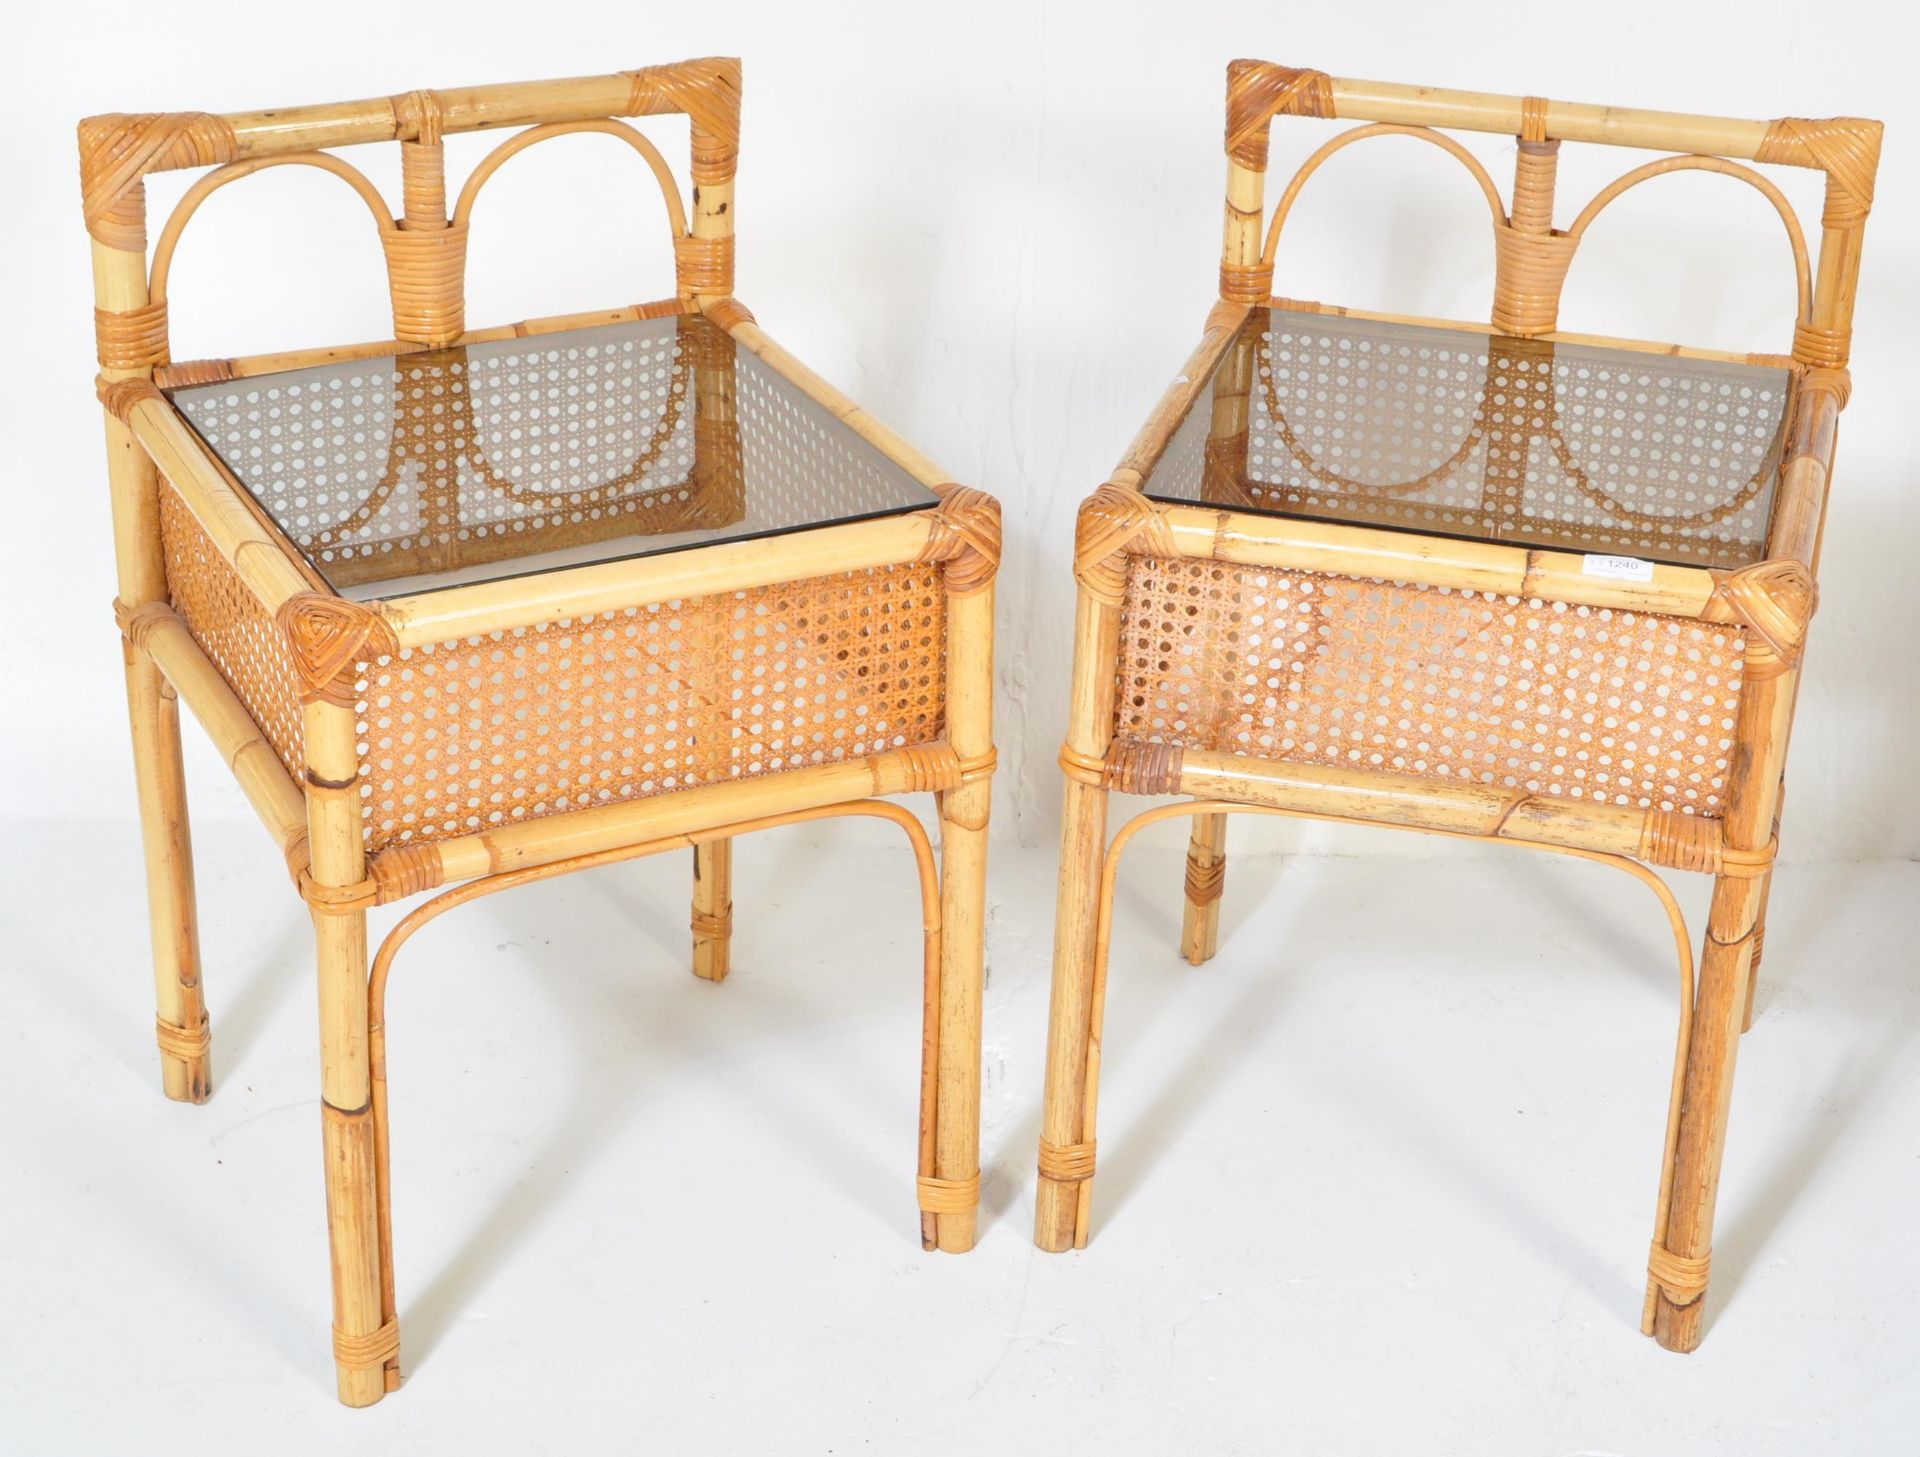 PAIR OF RETRO VINTAGE BAMBOO RATTAN BEDSIDE TABLES - Image 2 of 5